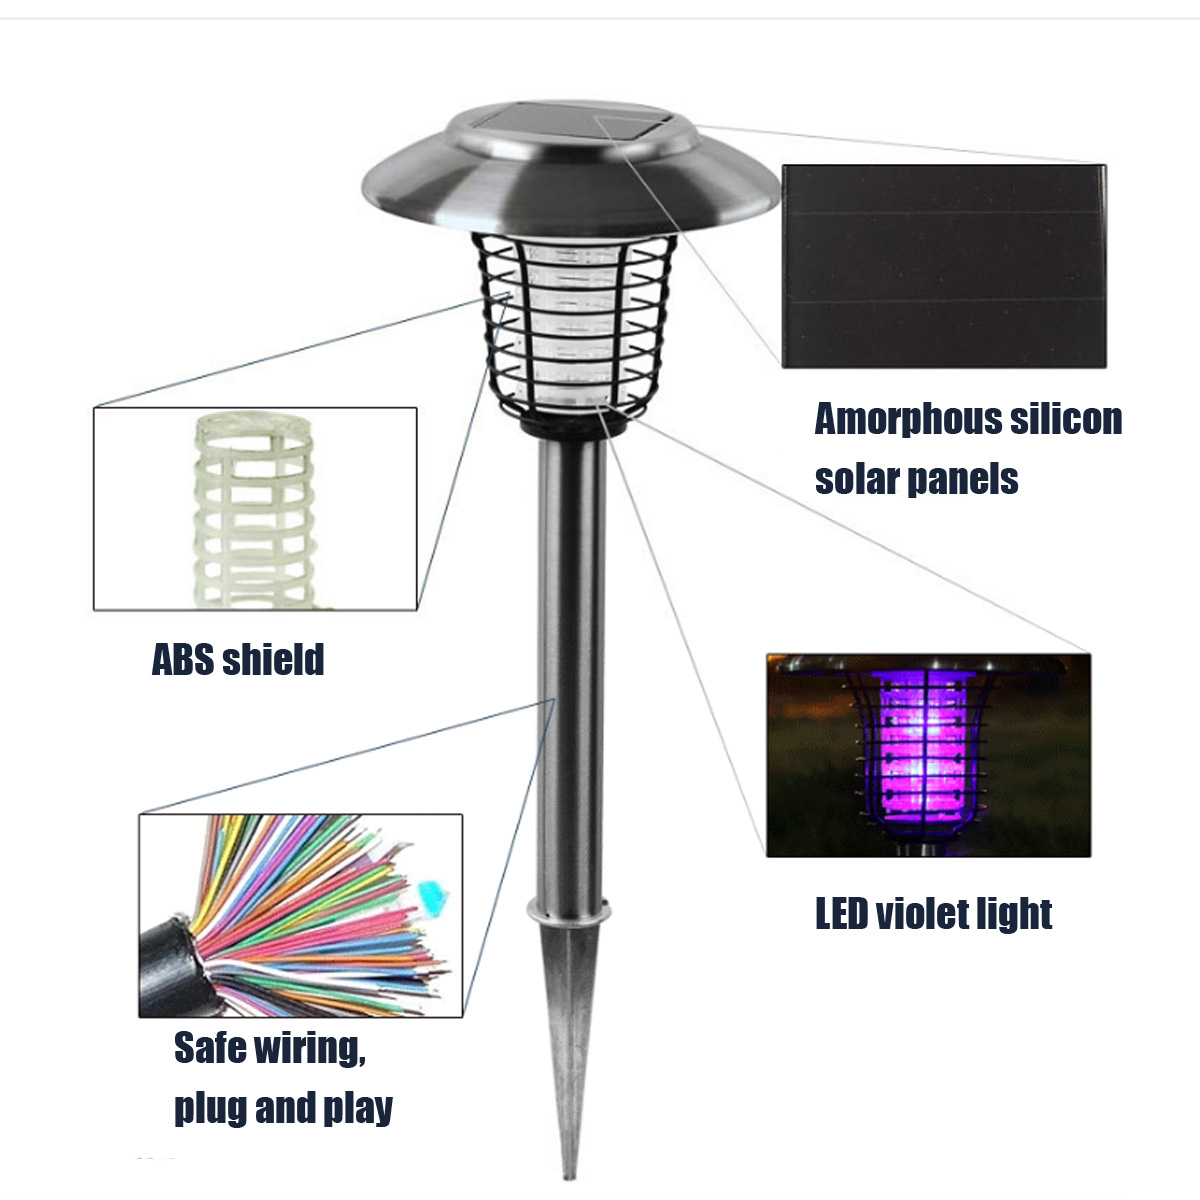 Solar-Electric-Shock-Mosquito-LED-Light-Fly-Bug-Insect-Zapper-Killer-Trap-Lamp-Intelligent-Light-con-1490338-4